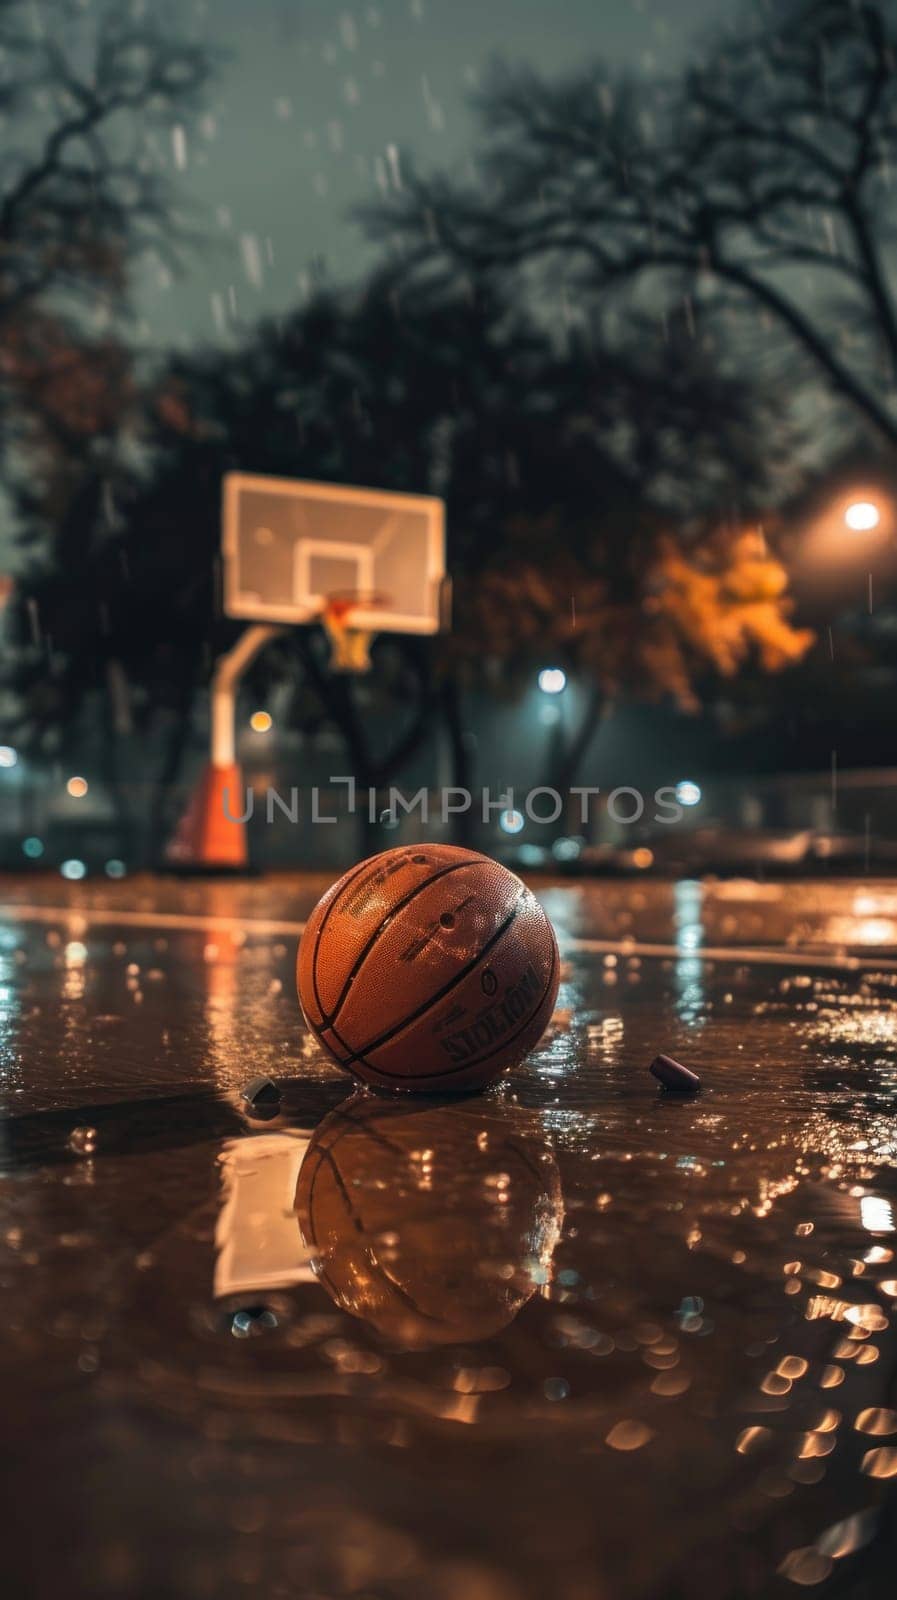 A basketball is sitting on the ground in front of a basketball hoop.